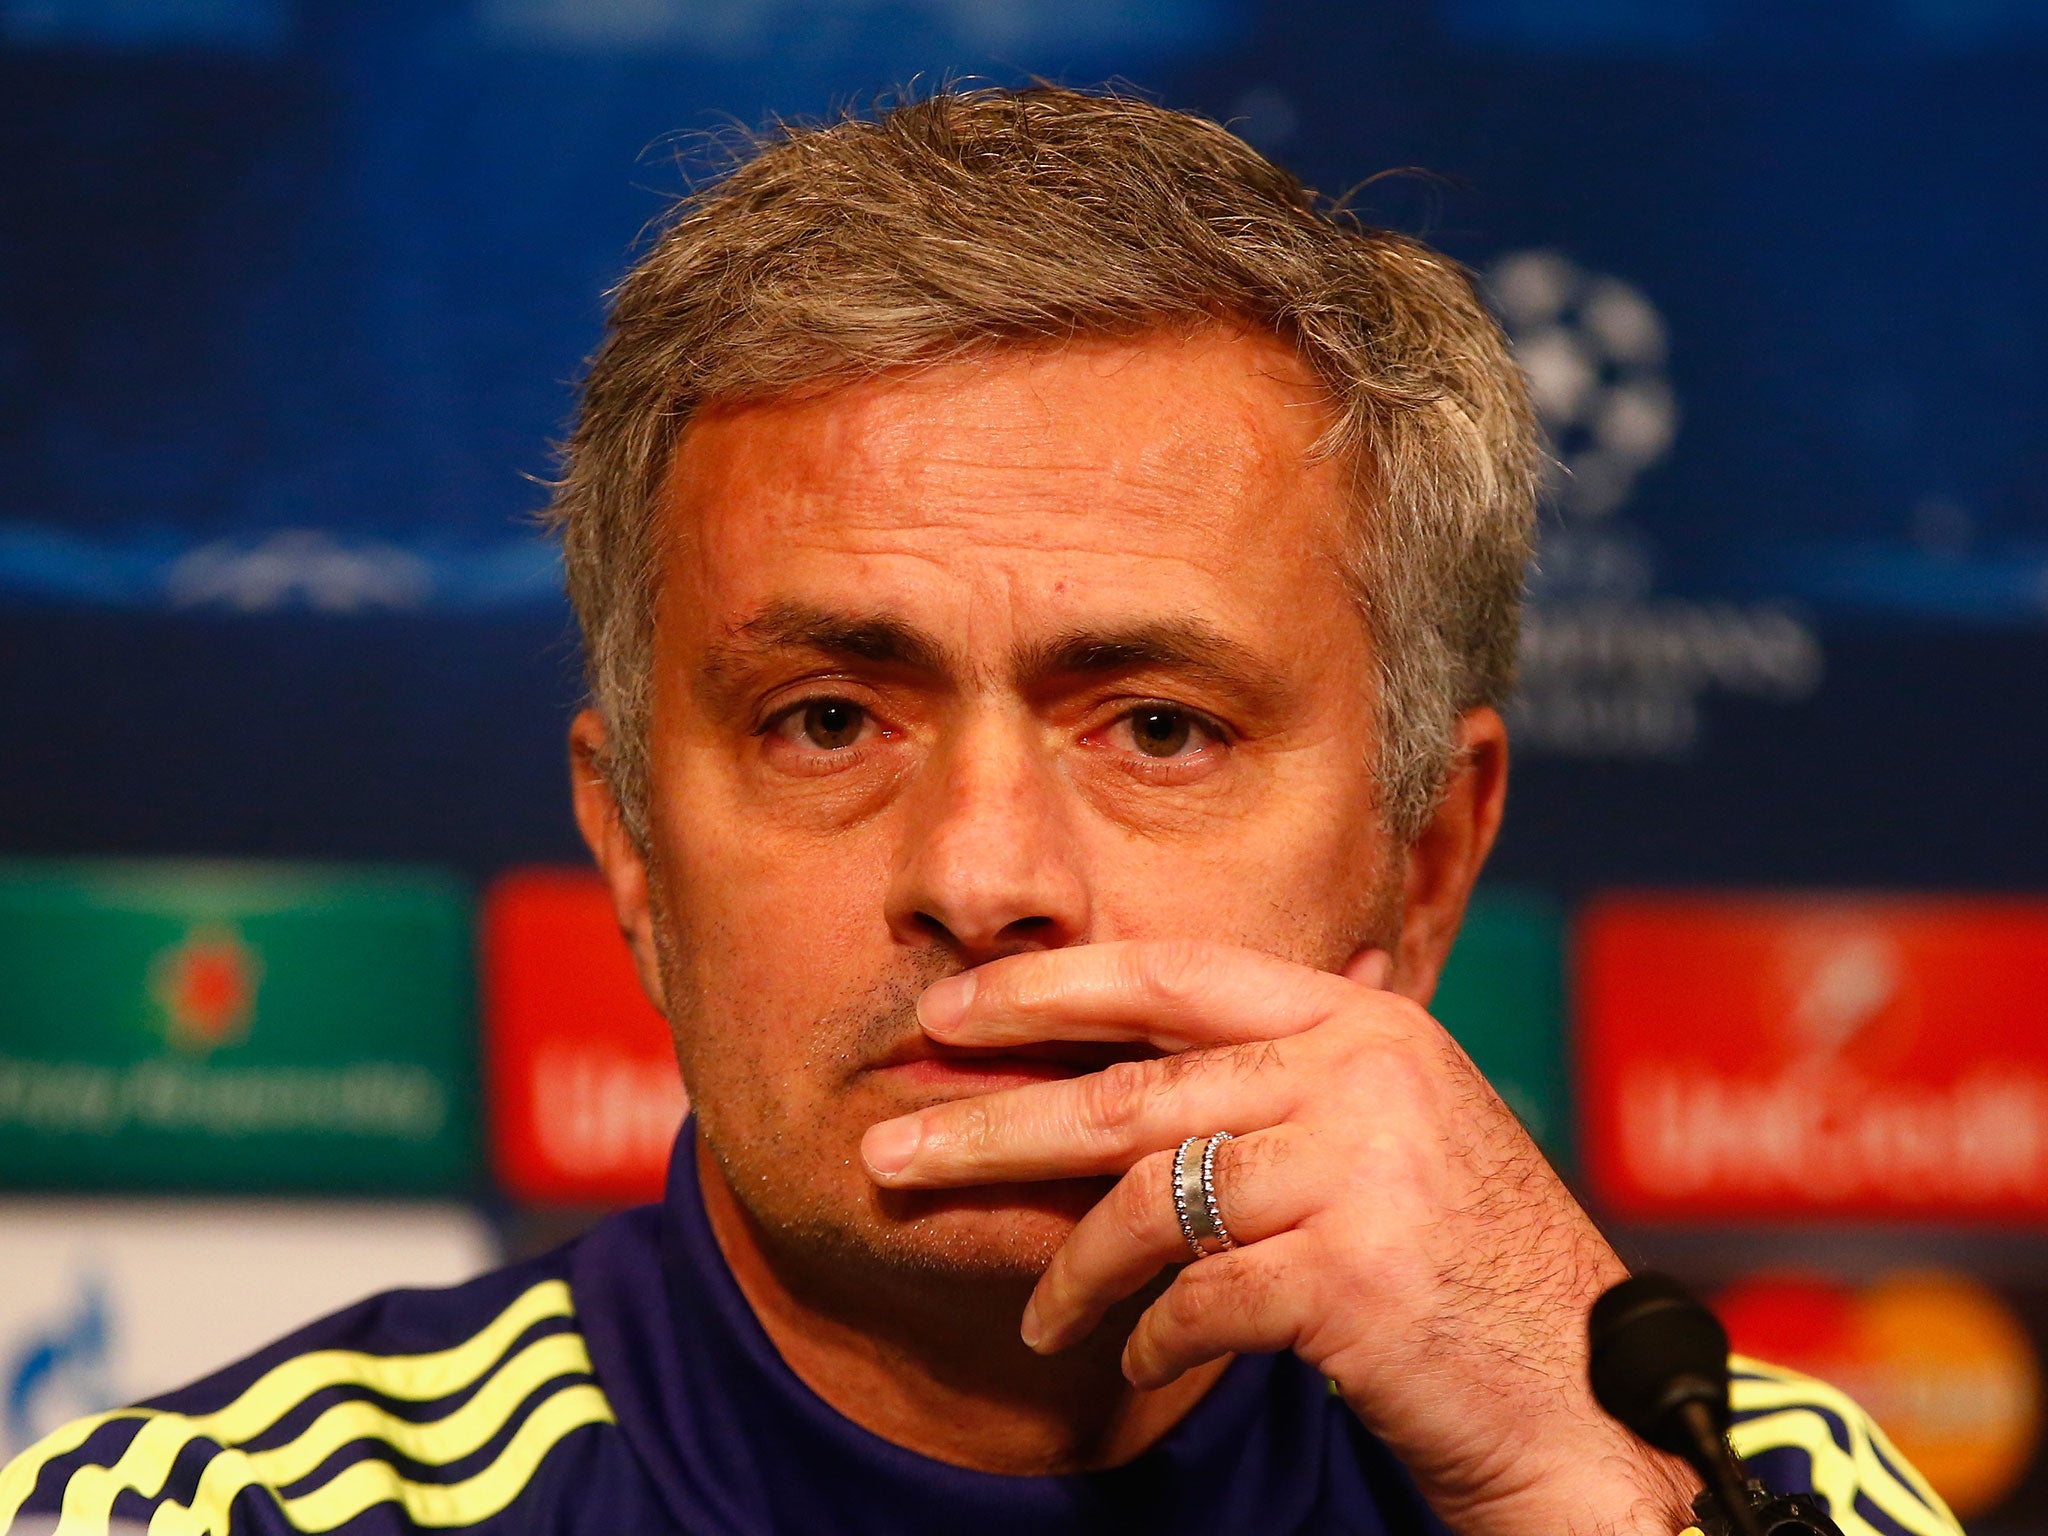 Chelsea manager Jose Mourinho admitted he was "ashamed" by the racial abuse in Paris